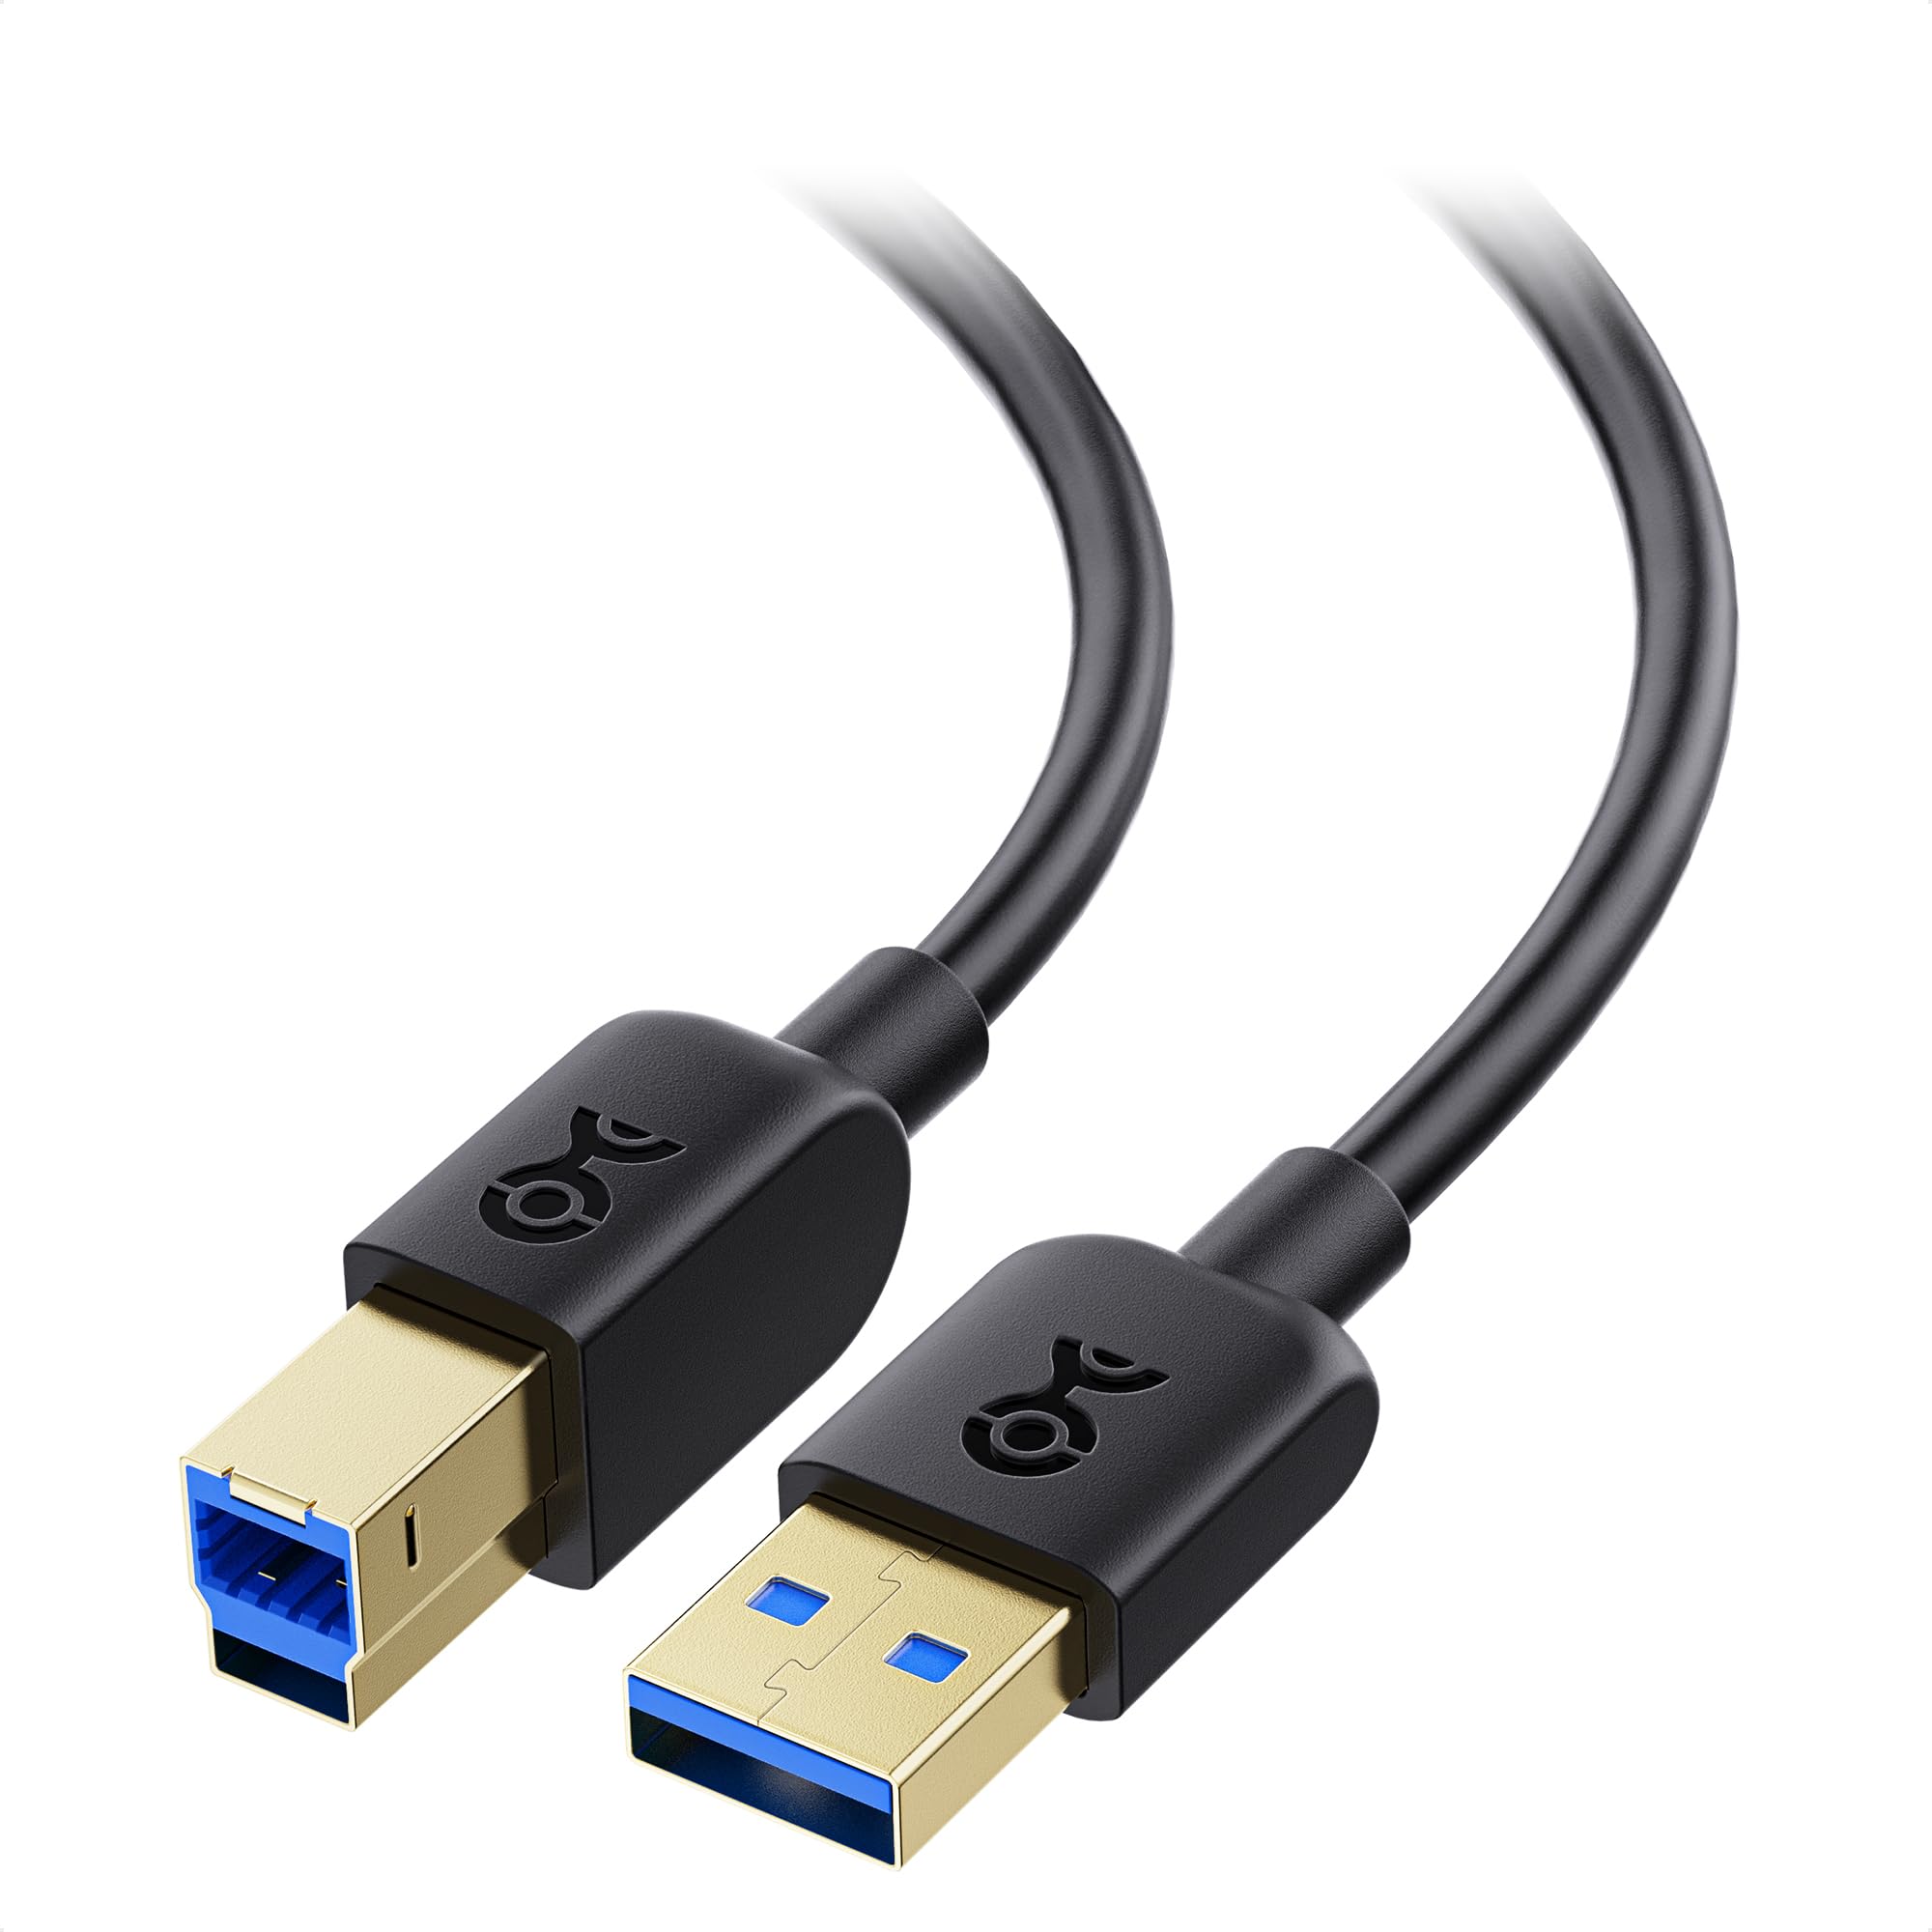 Ensure the USB cable is securely connected to both the Seagate Backup Plus drive and the Mac
If possible, try using a different USB cable or port to rule out any potential issues